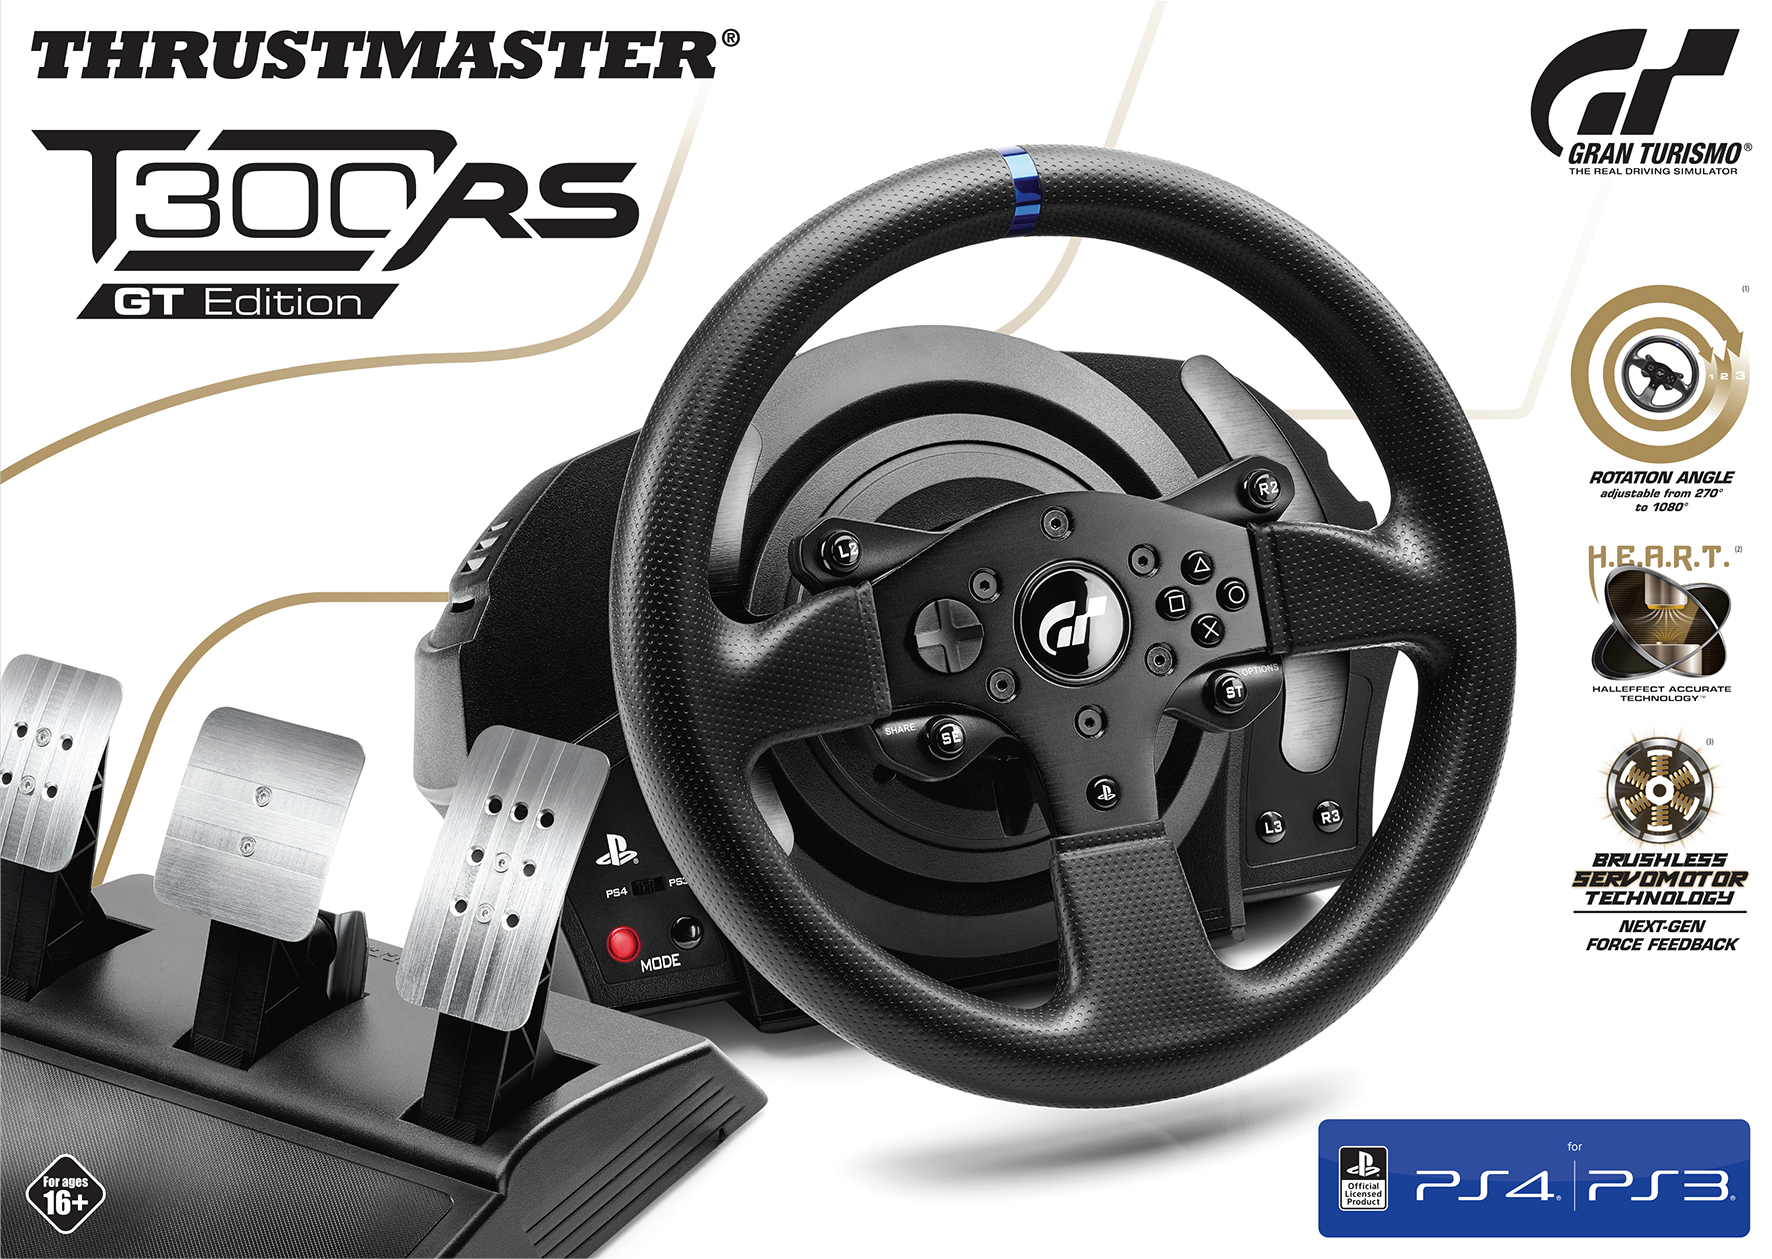 Volant Thrustmaster T300RS Sous License Officielle Gran Turismo